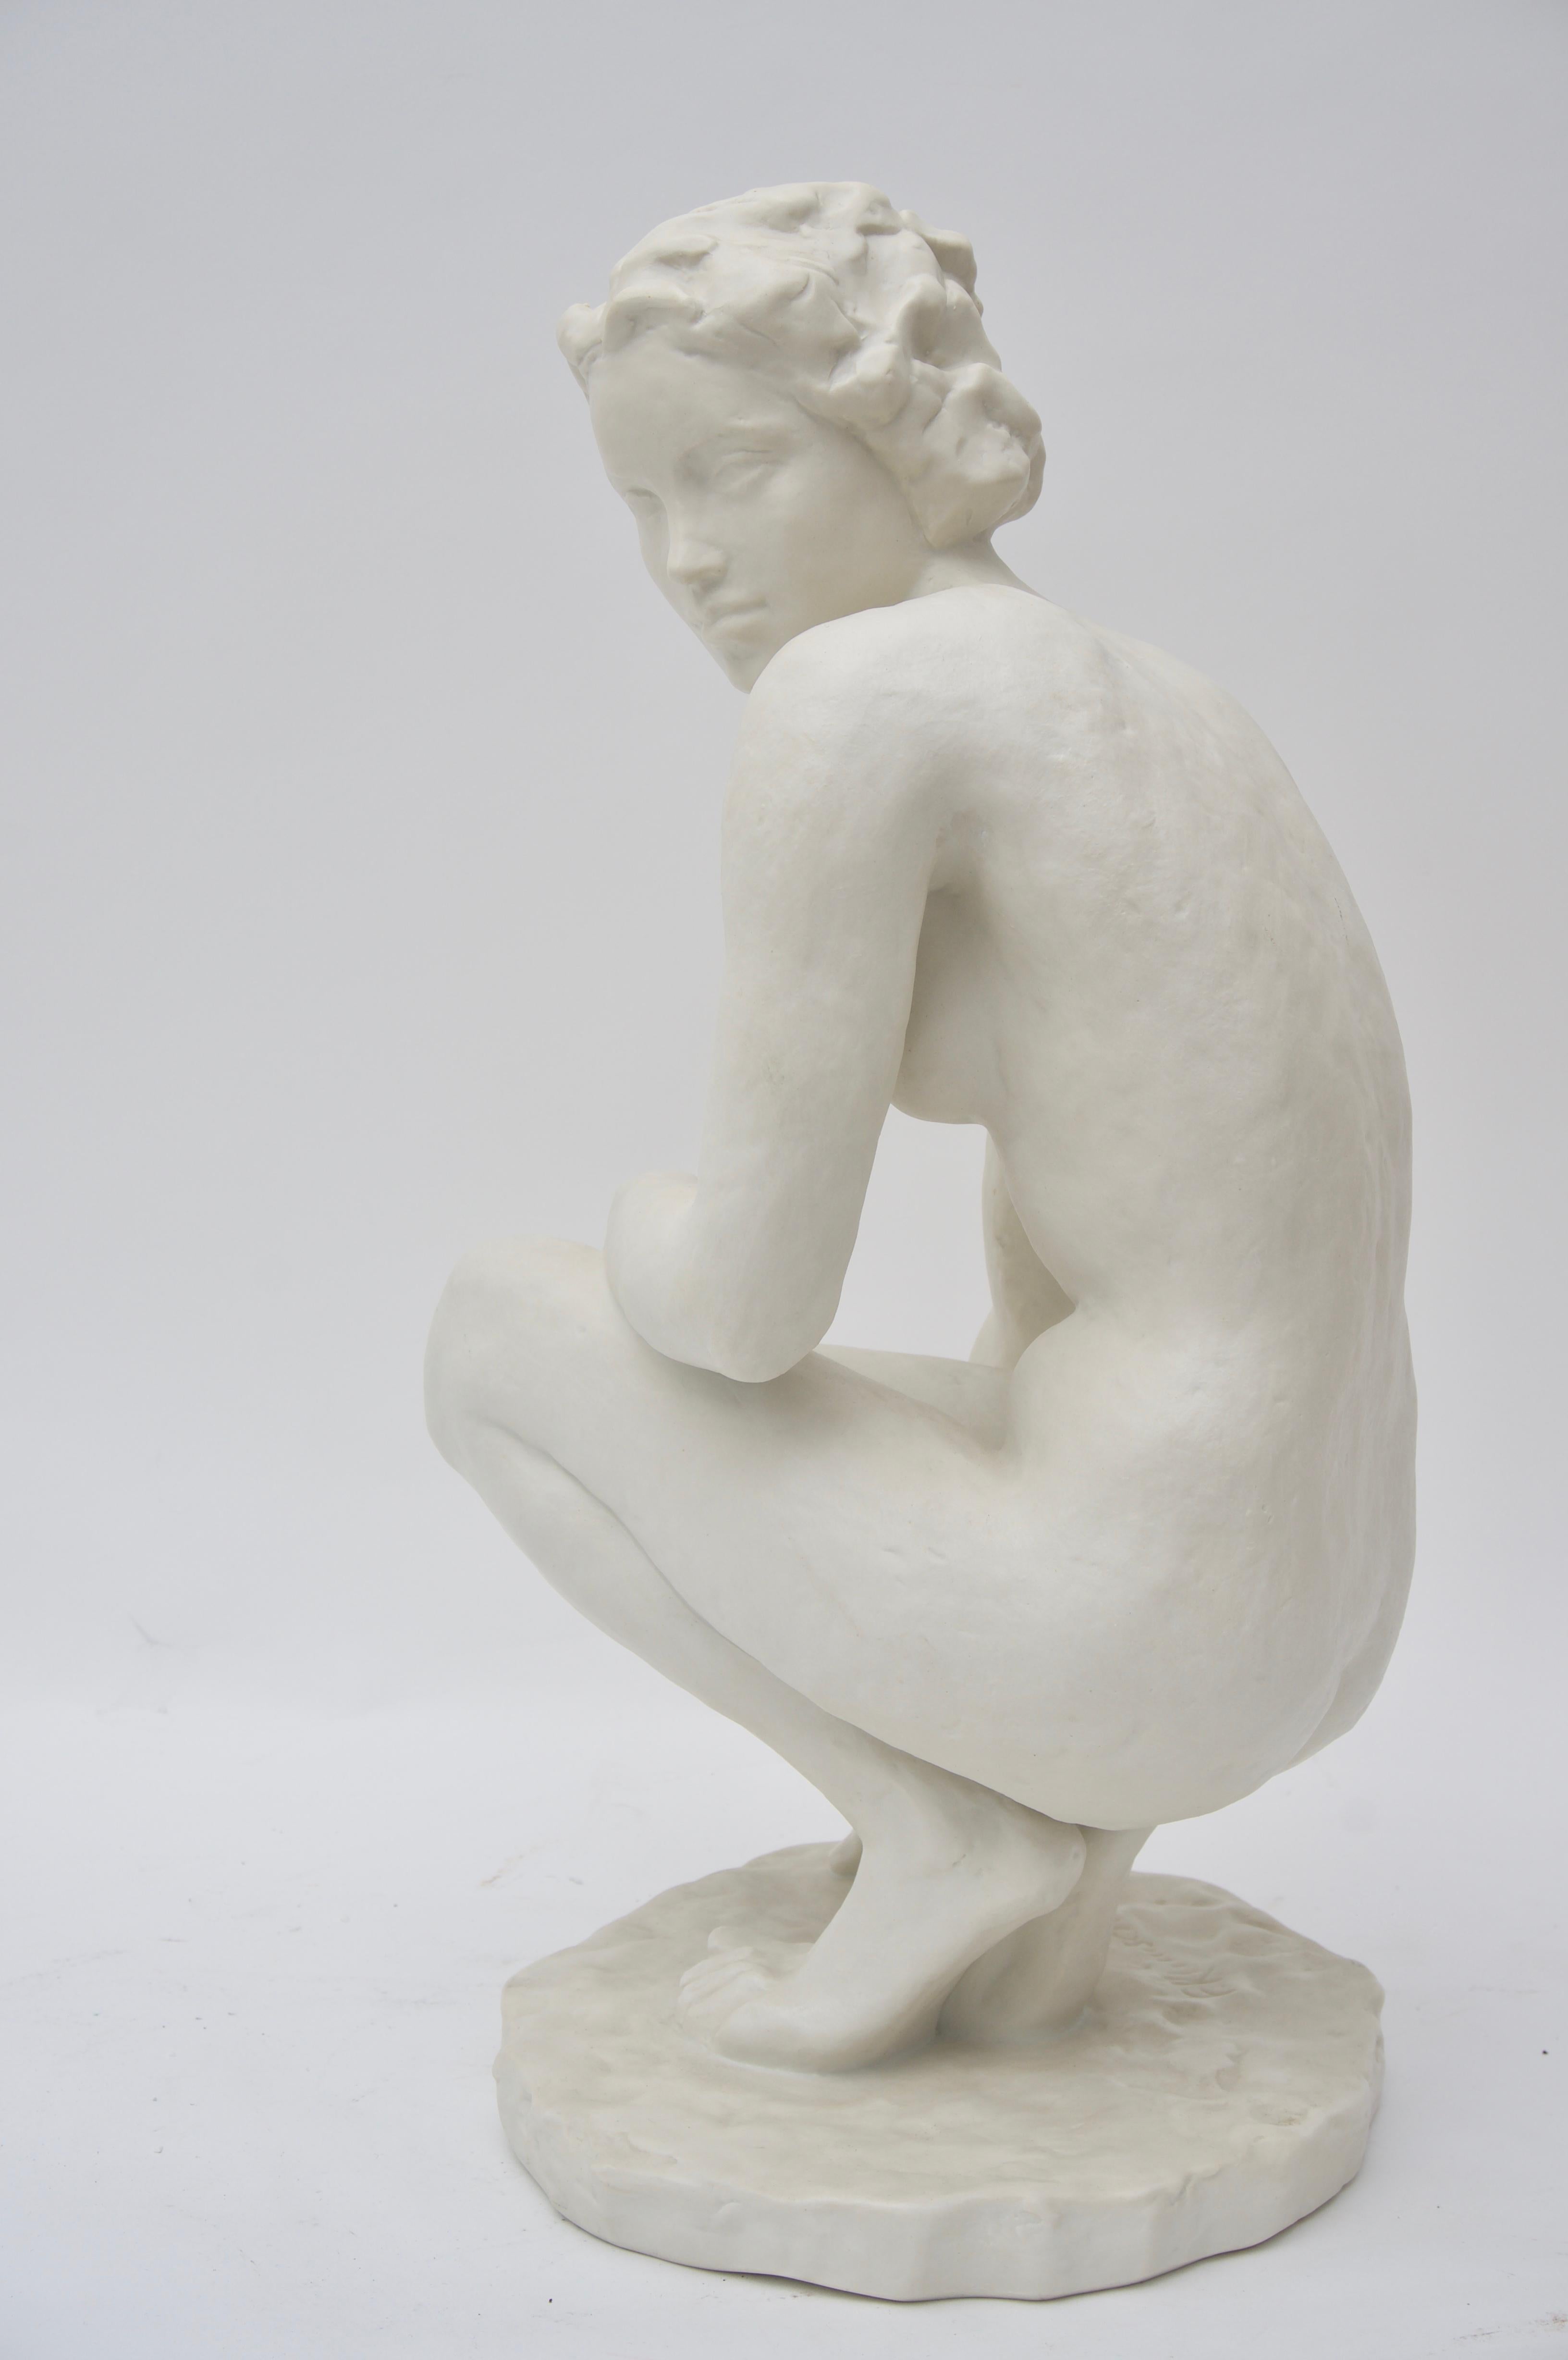 This stylish Rosenthal Art Deco figure is titled 